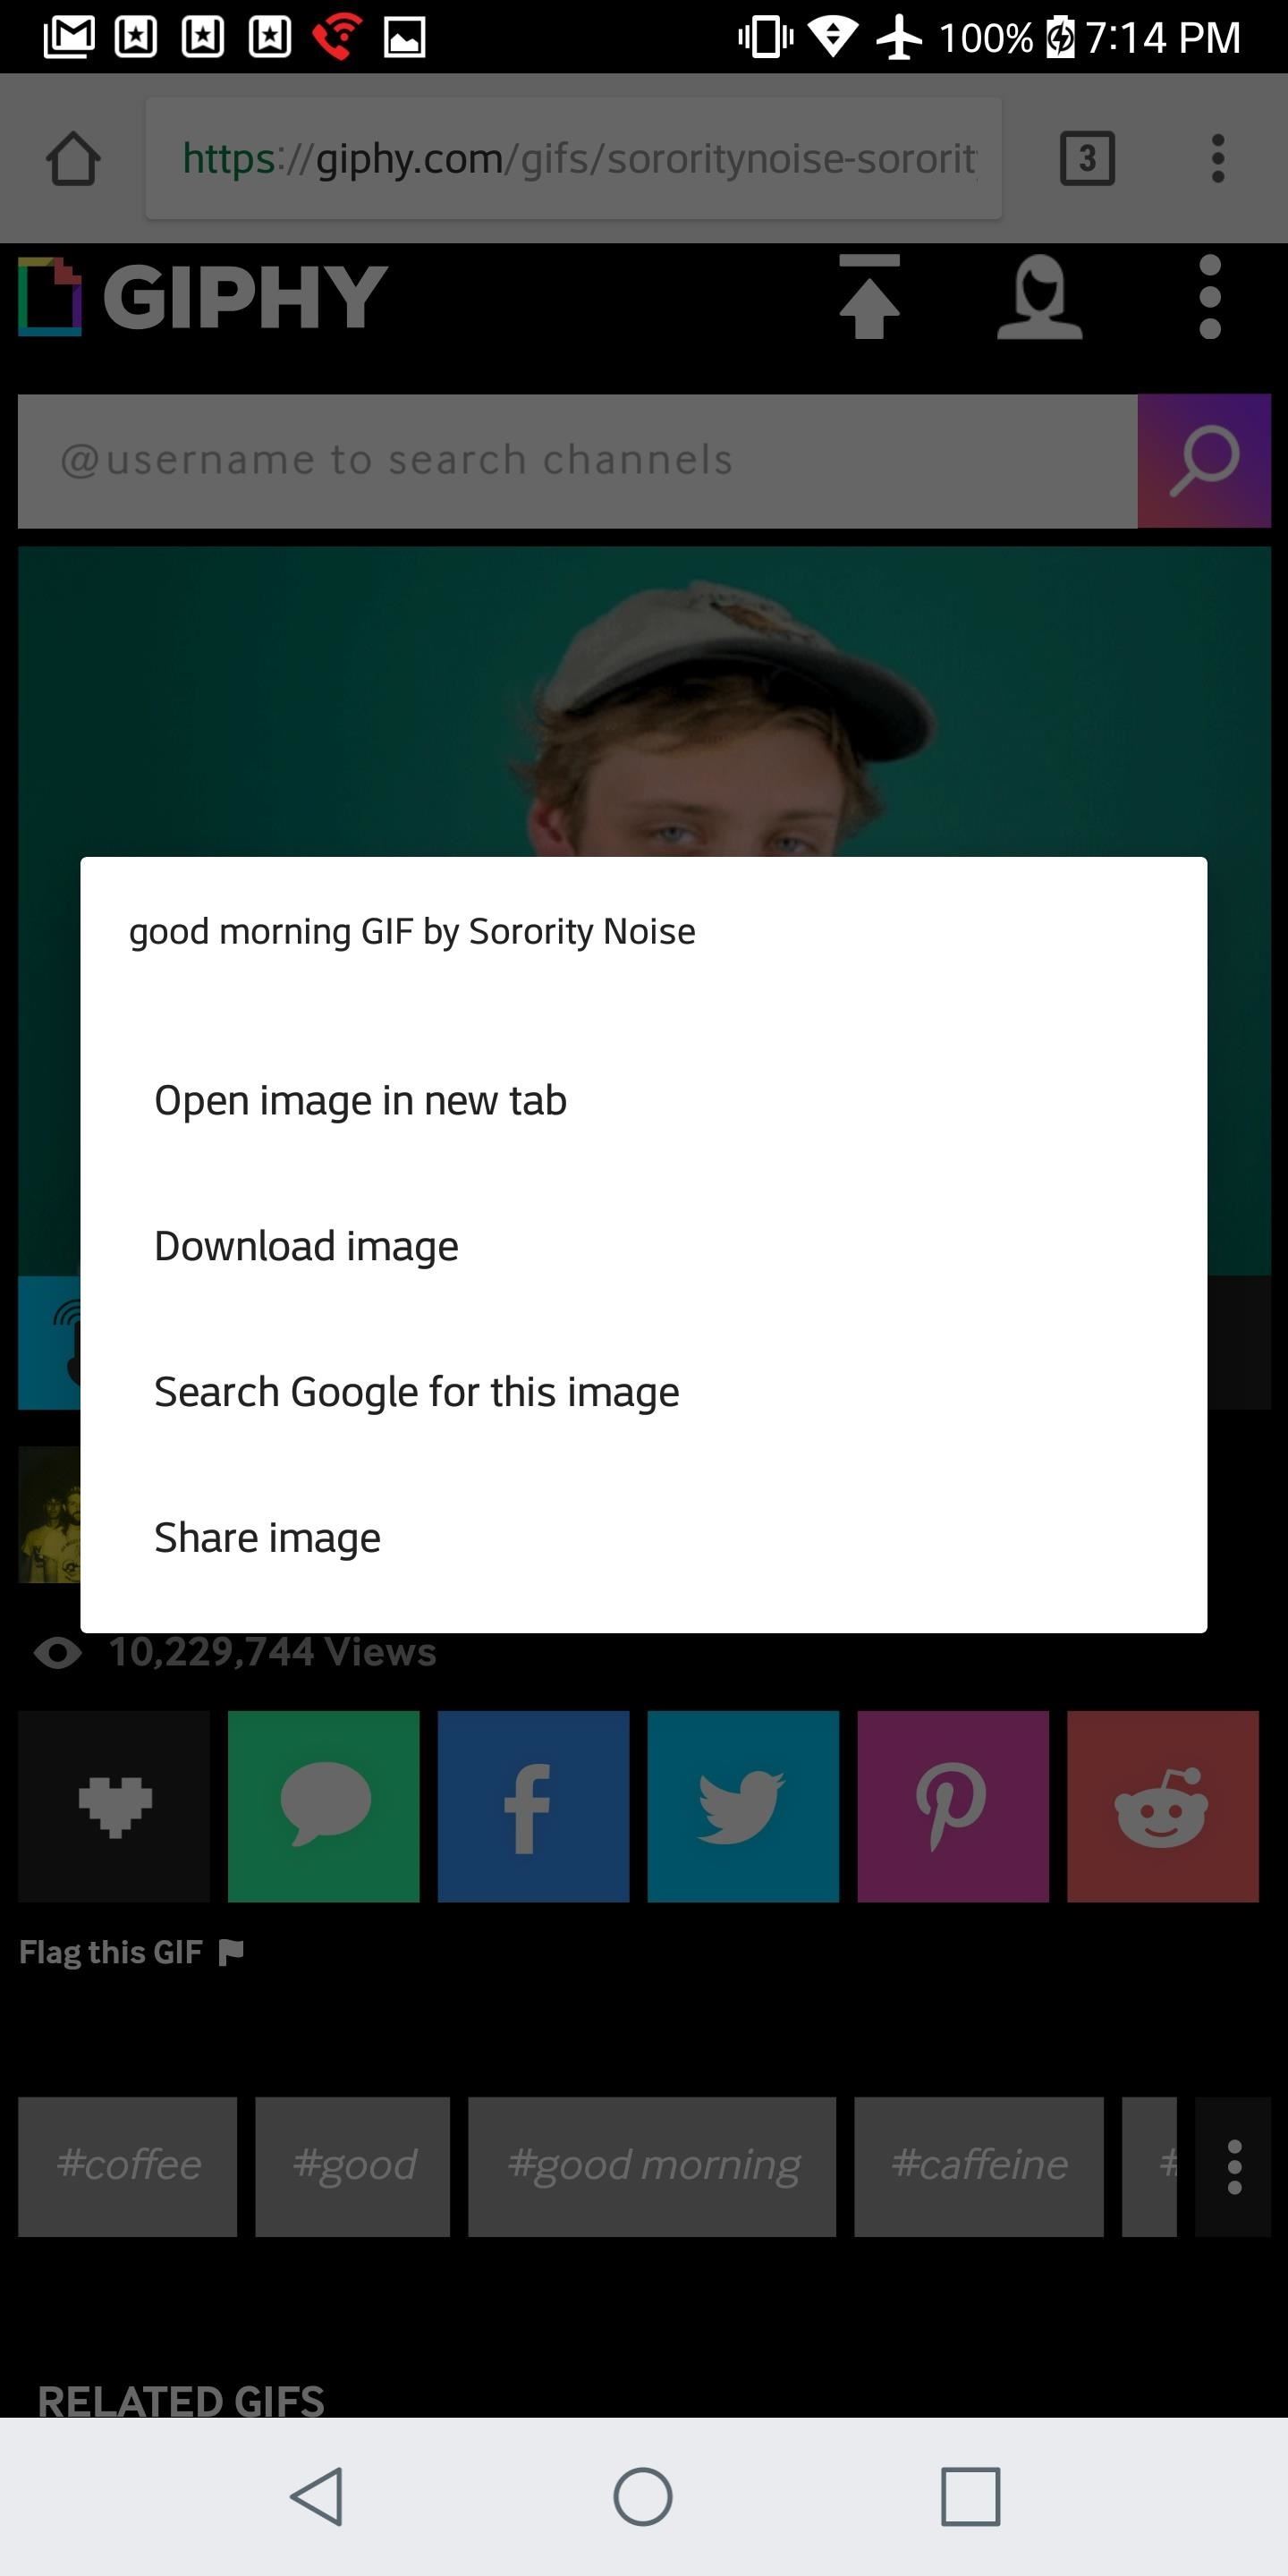 How to Set a GIF as the Wallpaper on Your Android